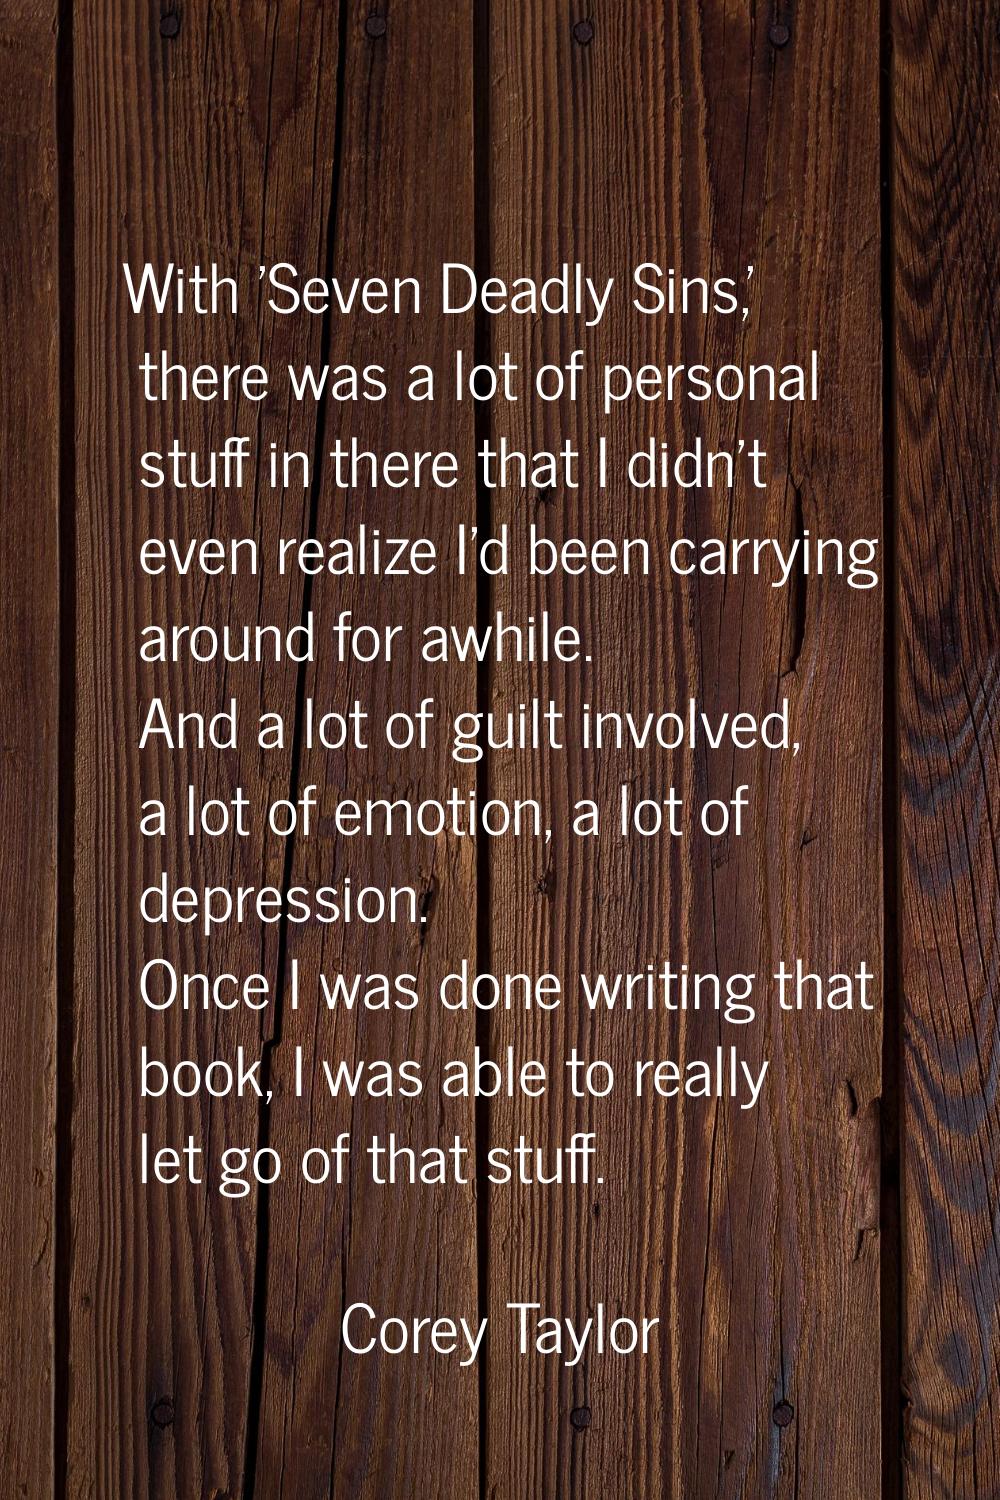 With 'Seven Deadly Sins,' there was a lot of personal stuff in there that I didn't even realize I'd